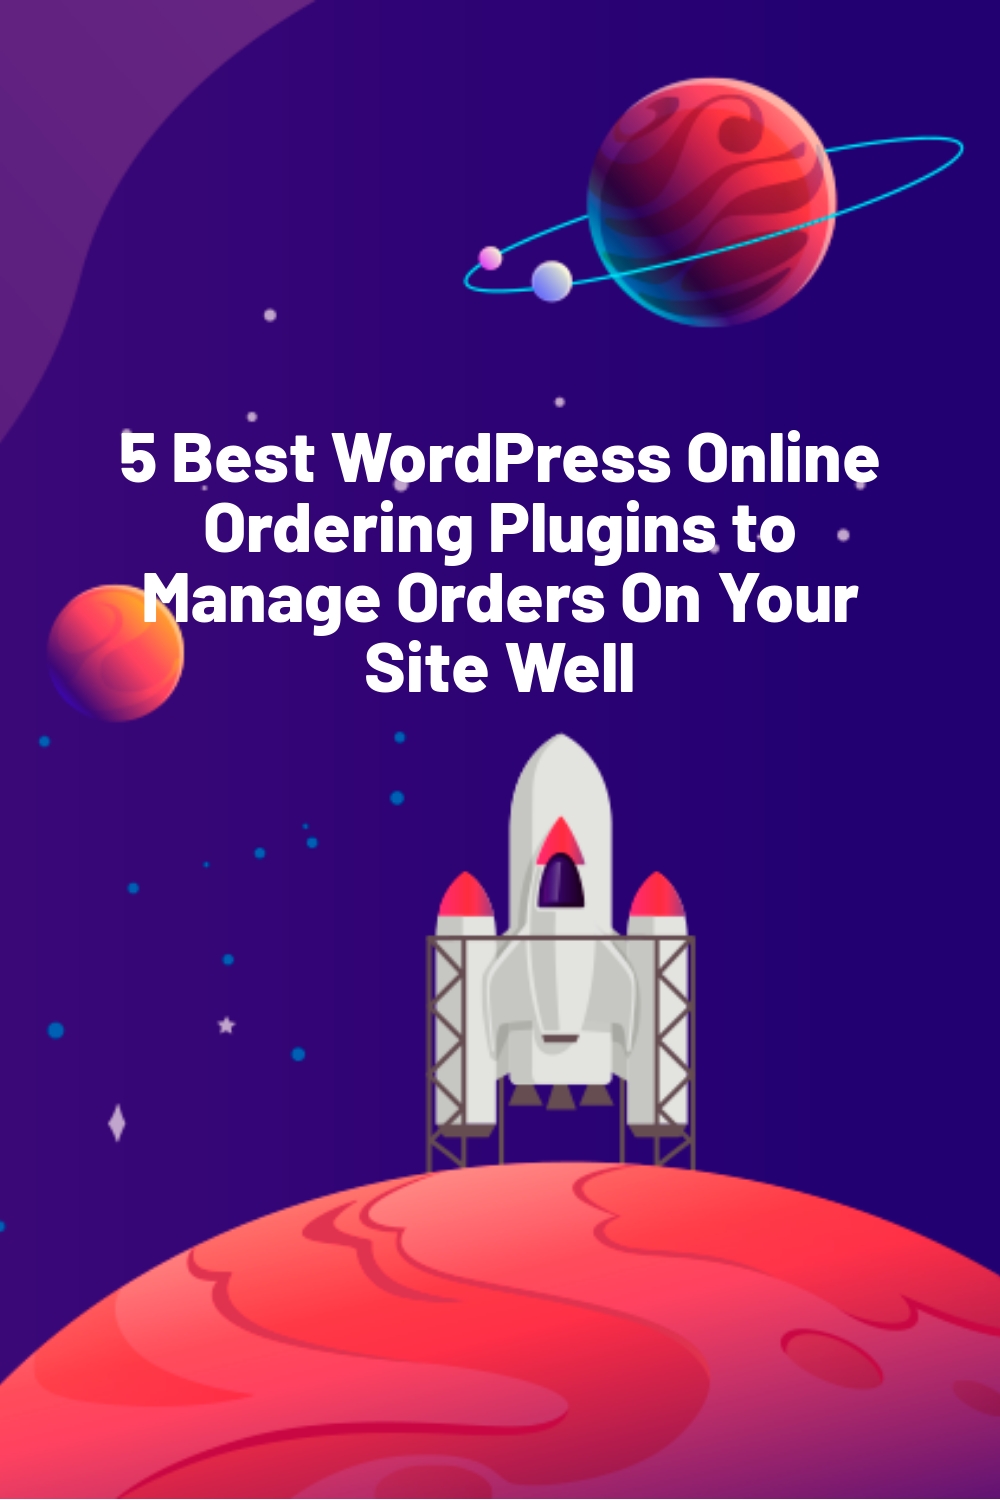 5 Best WordPress Online Ordering Plugins to Manage Orders On Your Site Well